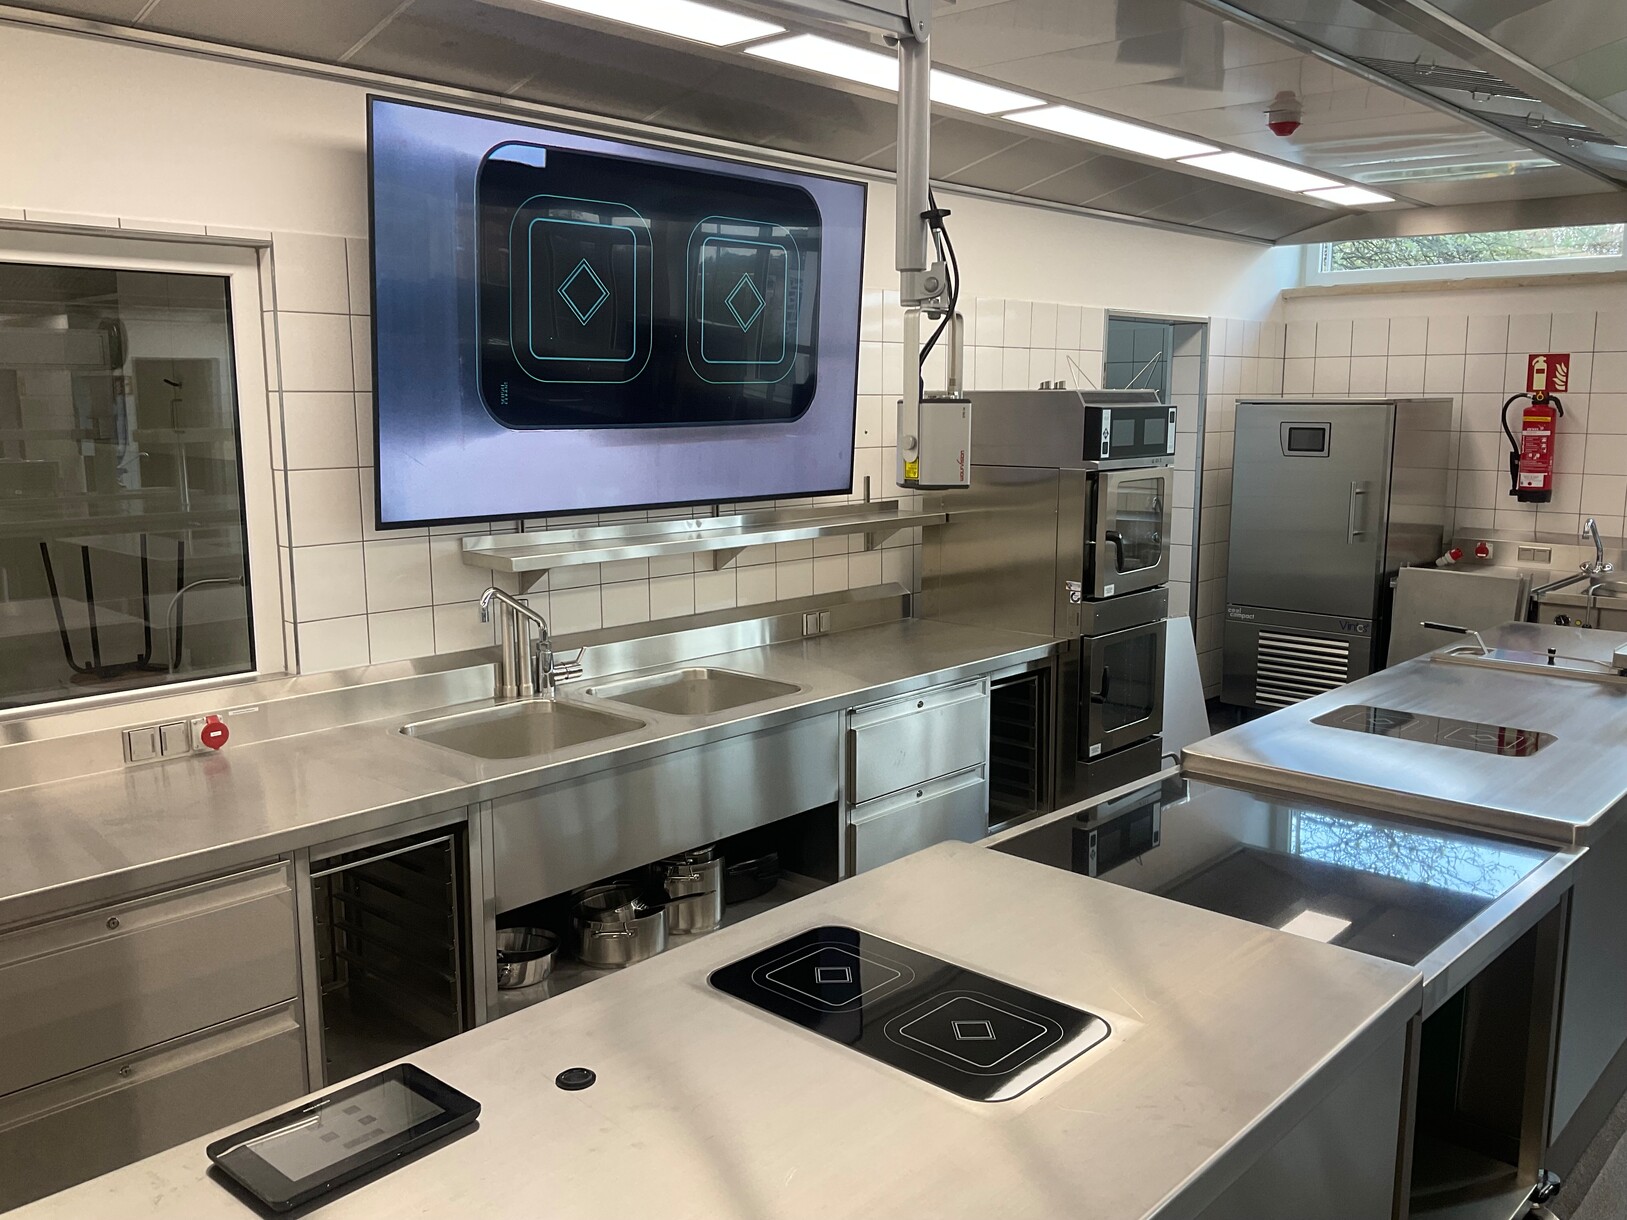 The EYE-14 camera displays FHD content on-screen from almost any angle in the kitchen at BBS III Lüneburg.